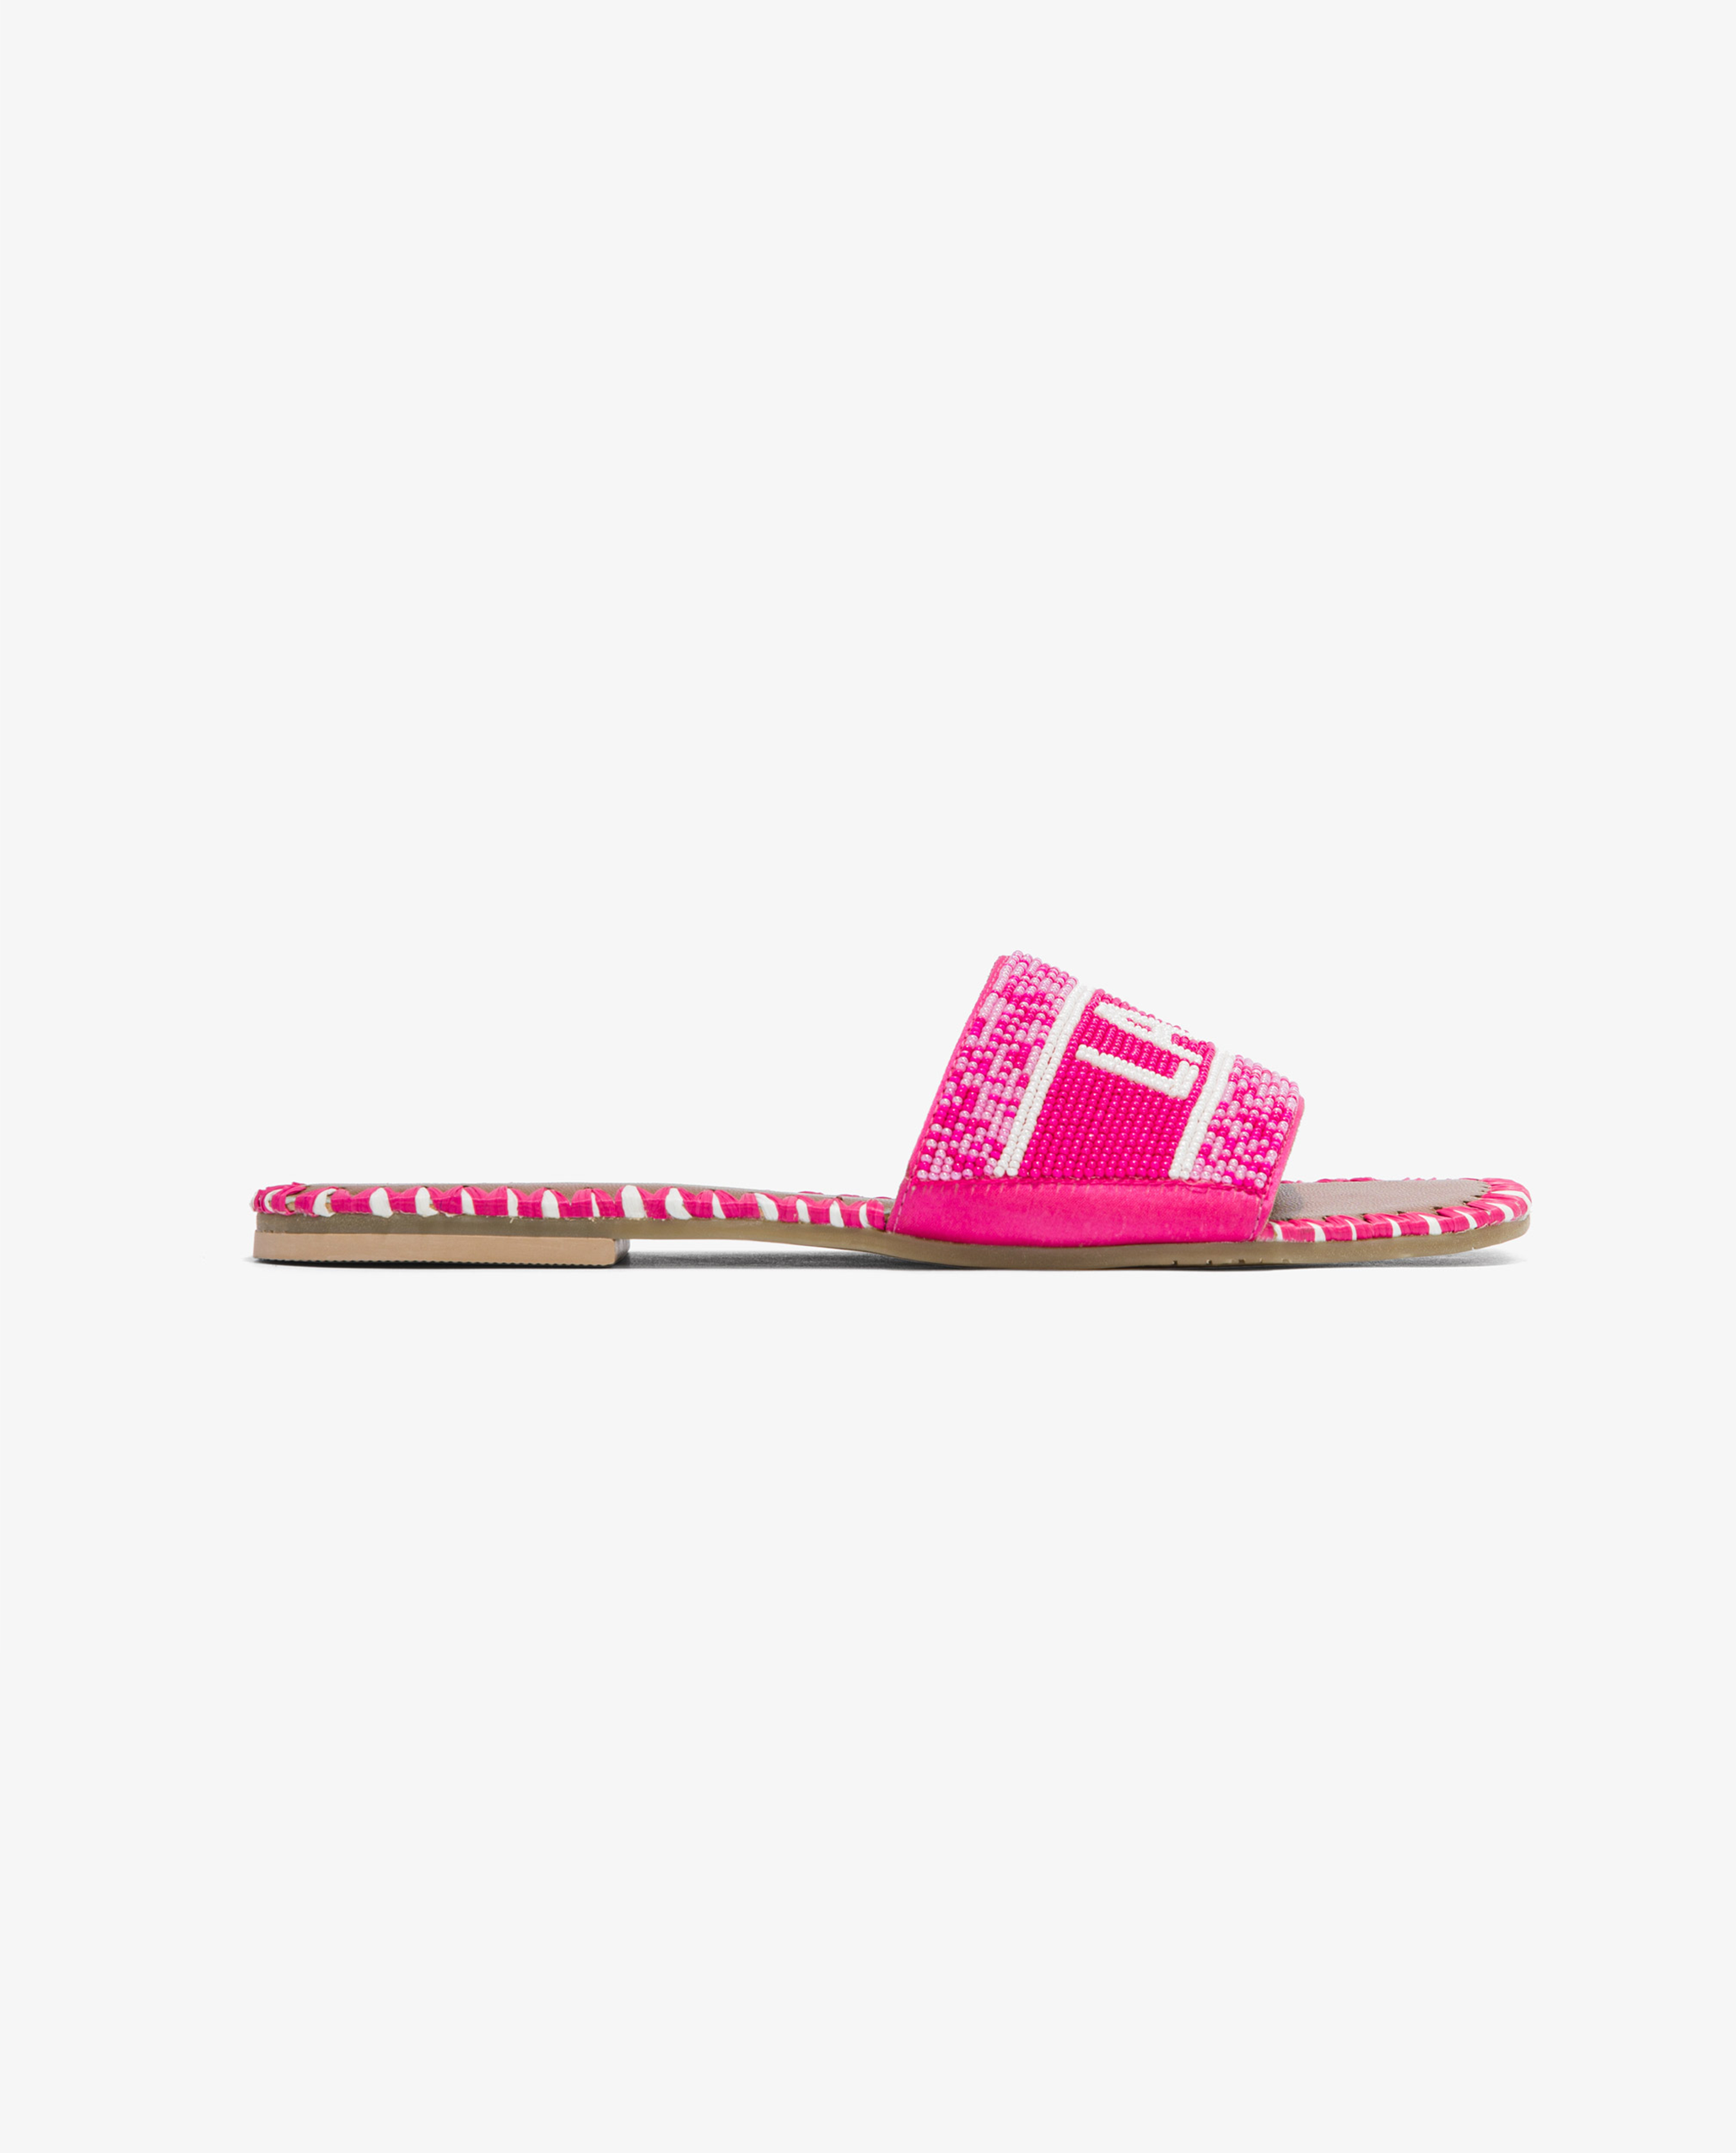 NUR ITALY CUPLE Lola Pink Beads Sandal, color, PINK AND WHITE